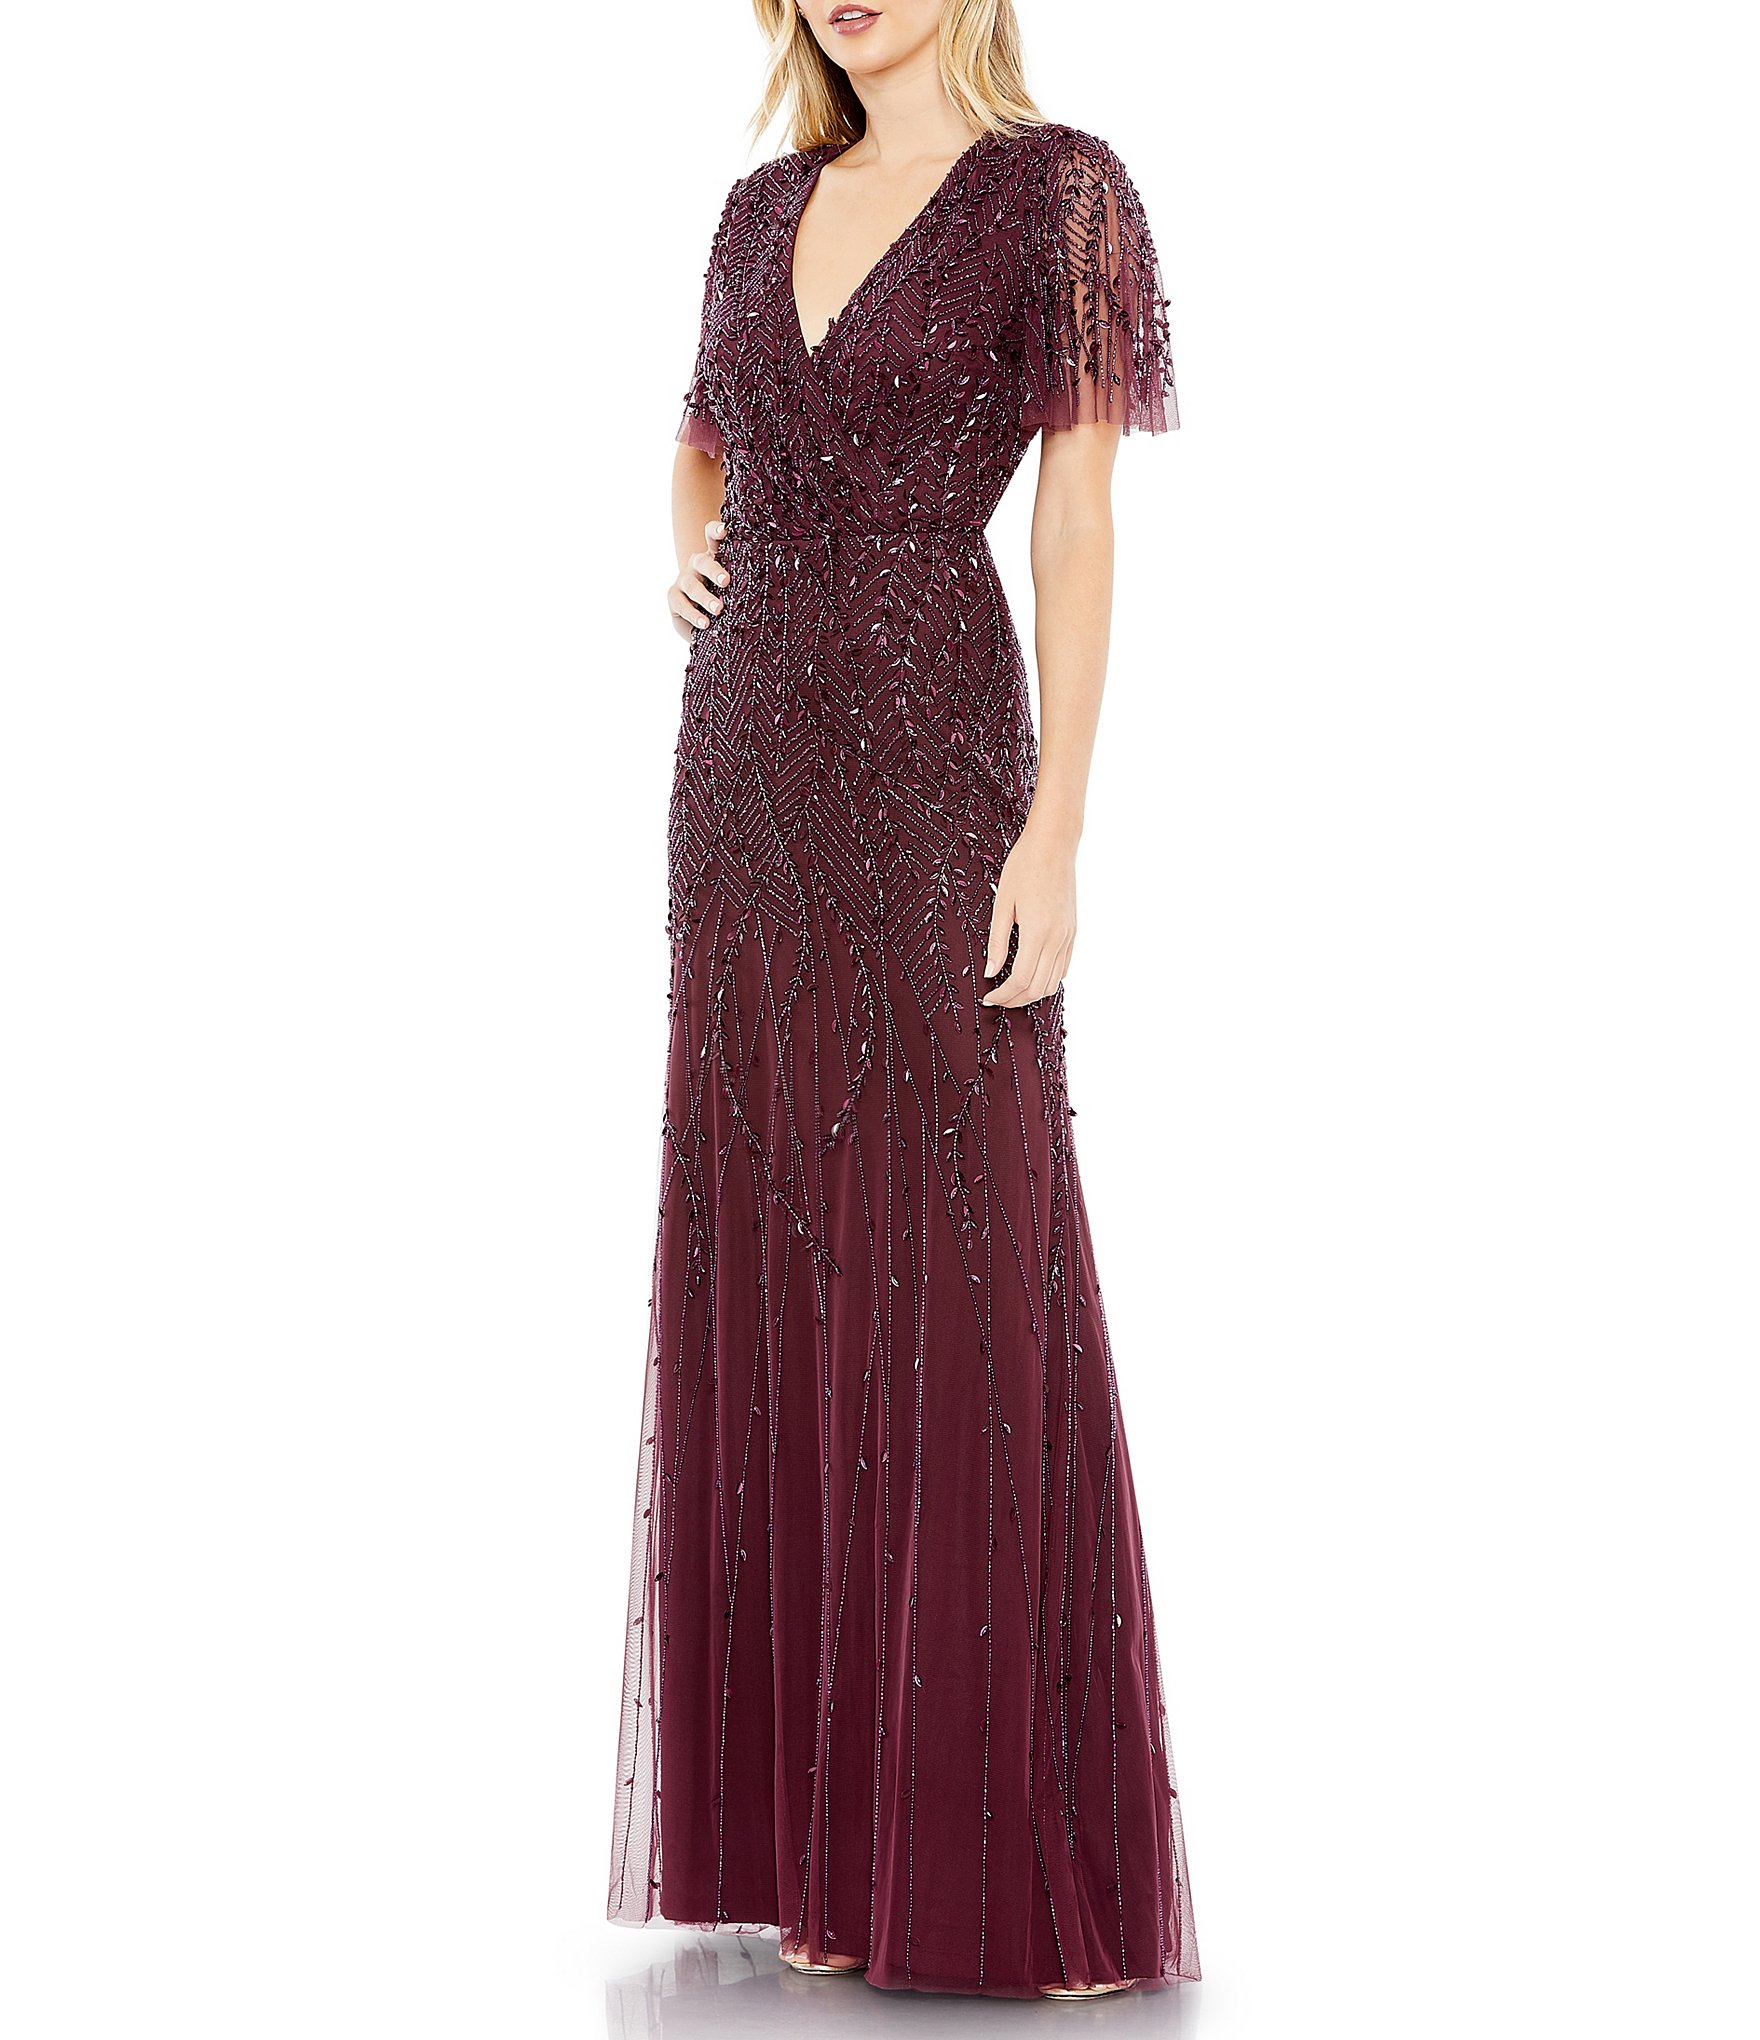 Clearance 12, L Women's Formal Dresses & Evening Gowns